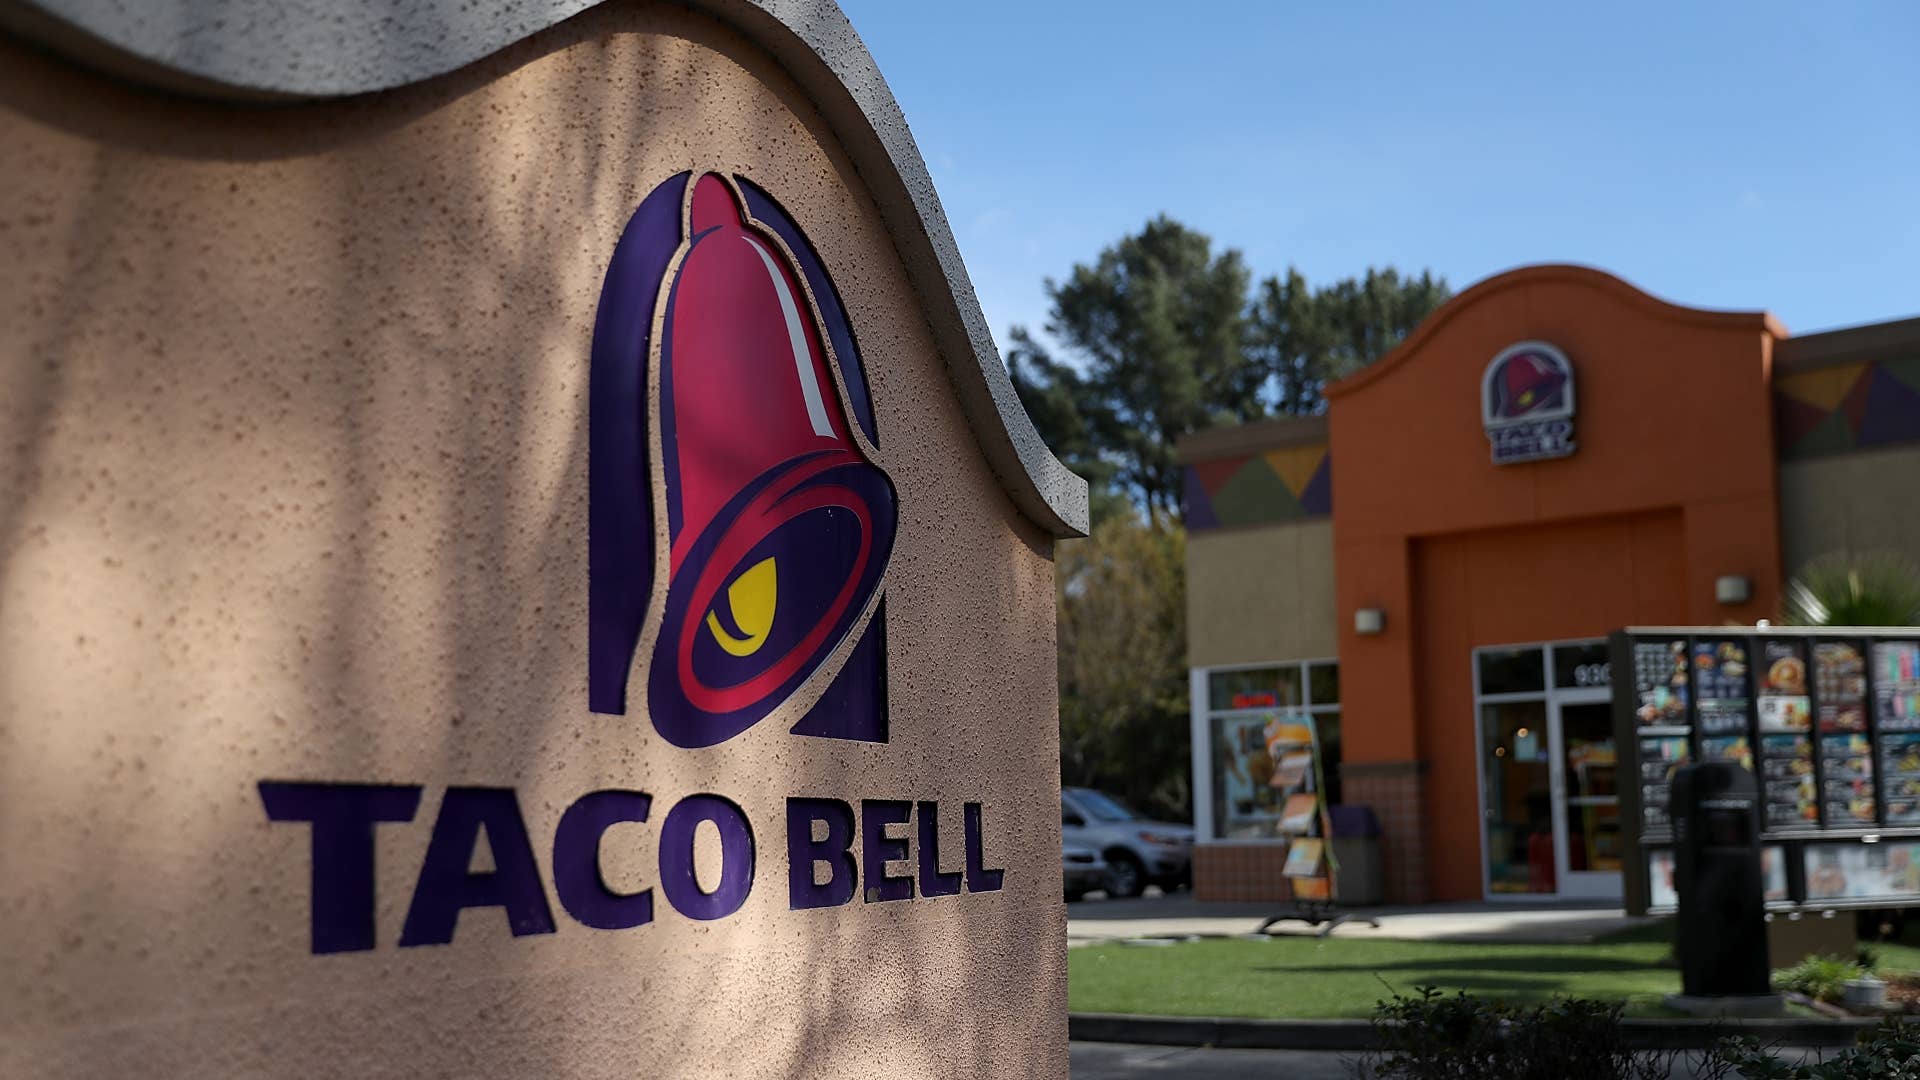 A sign is posted in front of a Taco Bell restaurant.